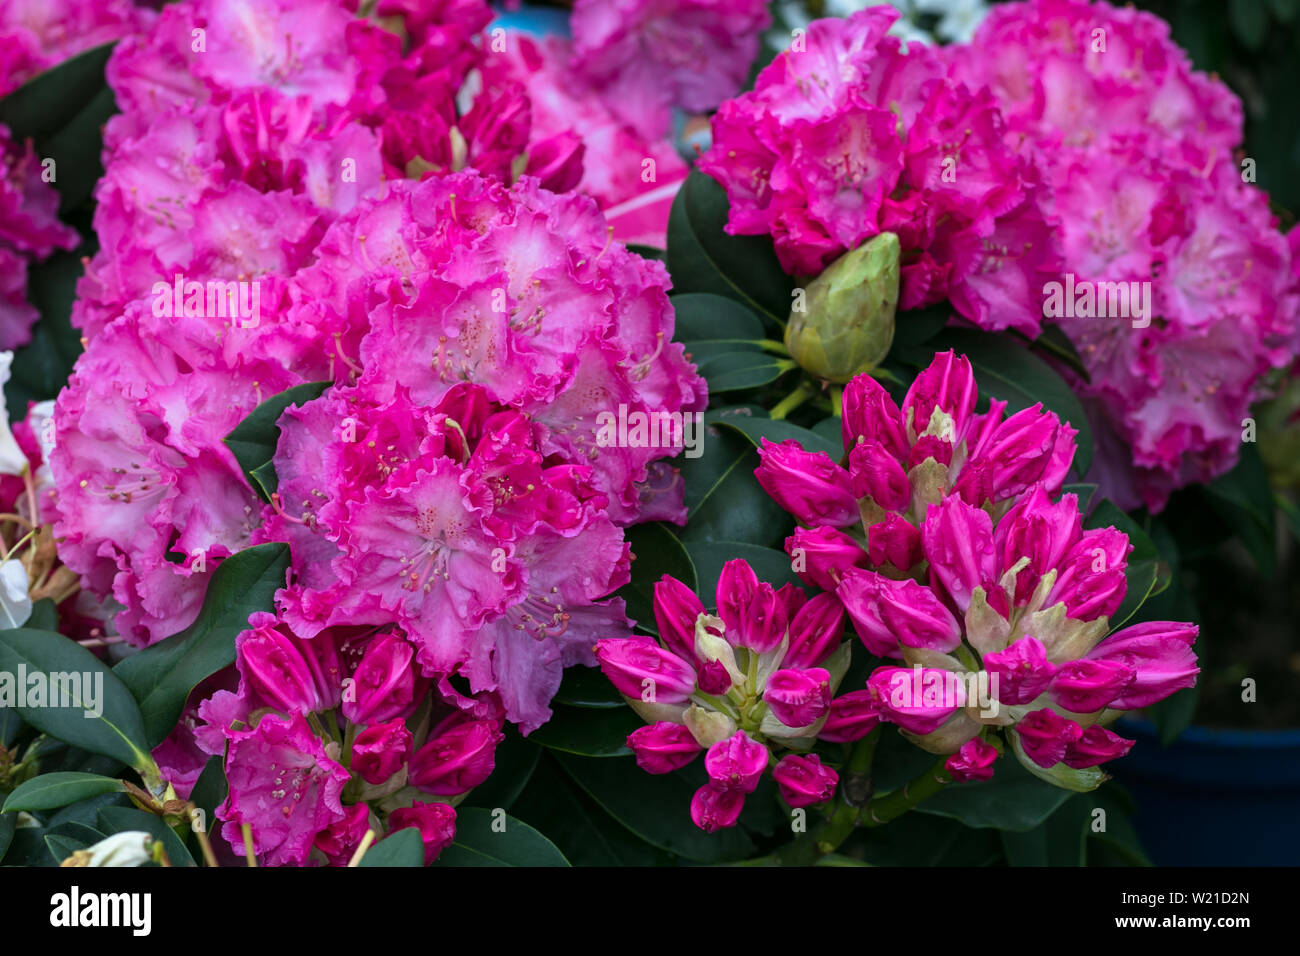 Bush of azaleas in pink color. Rhododendron Pearces. Pink flowers close-up. Scarlet, red, azaleastrum. Alpine rose is bloom. Potted garden. Hot pink Stock Photo